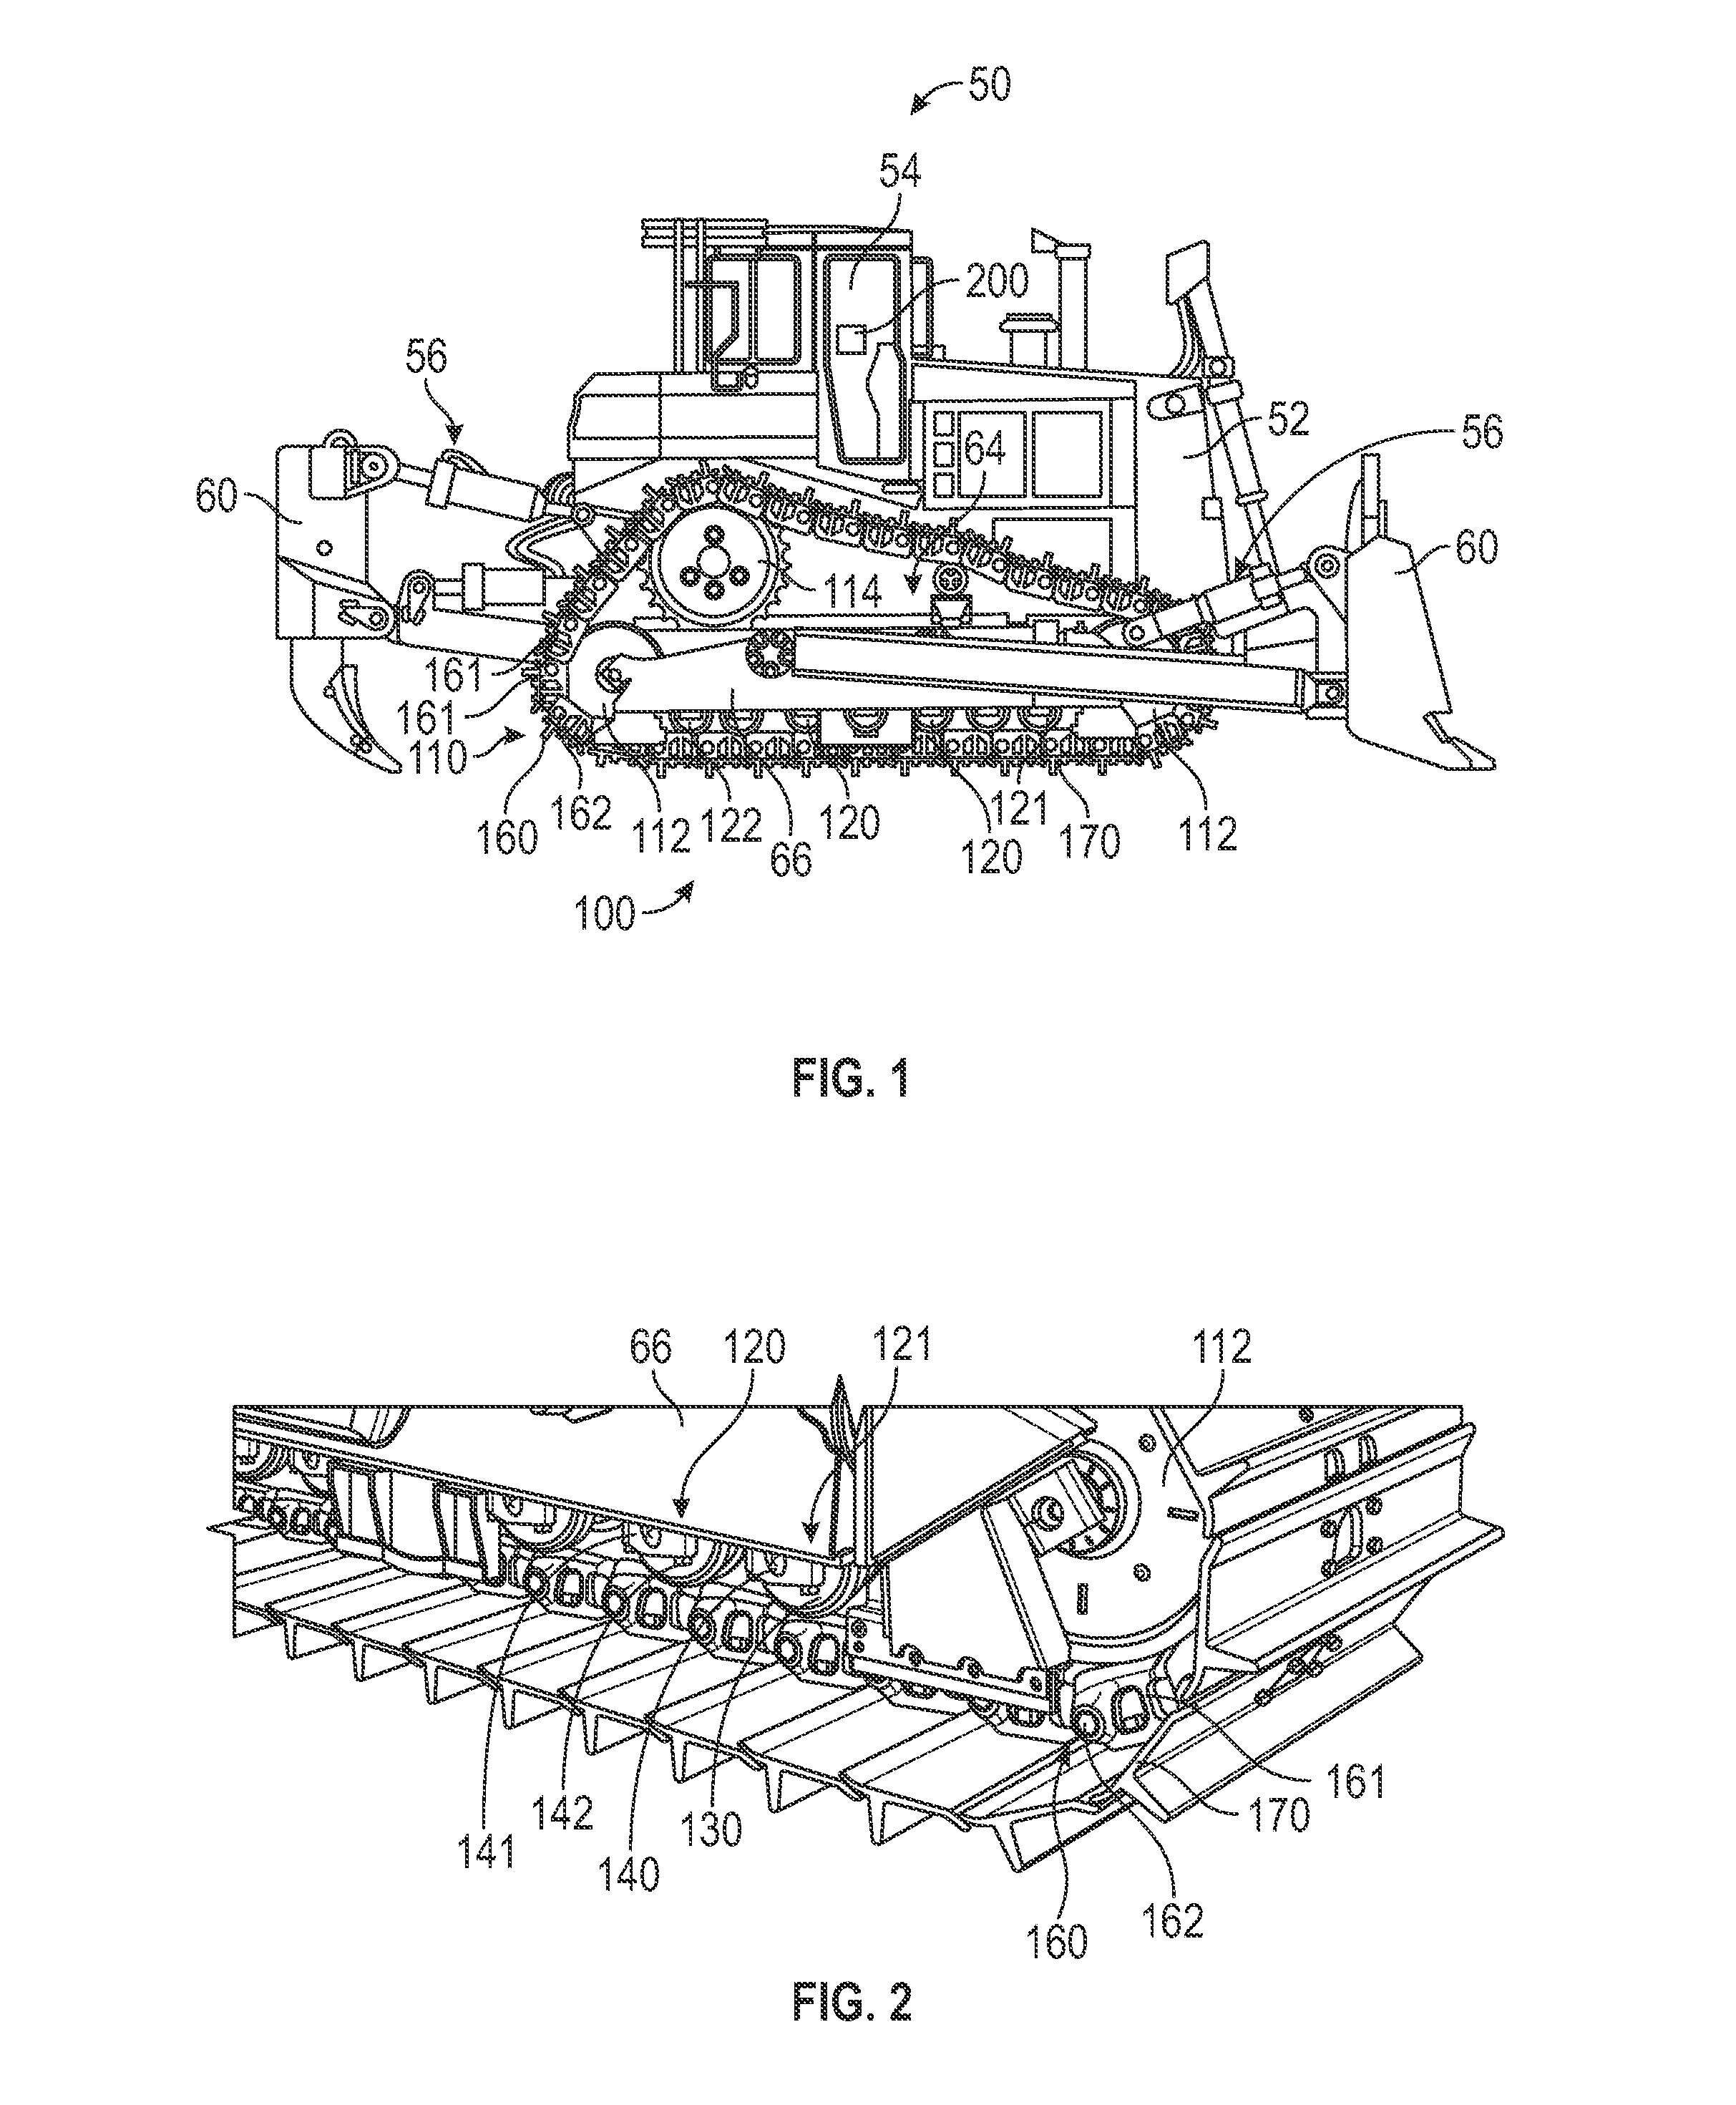 Track roller assembly with a wear measurement system